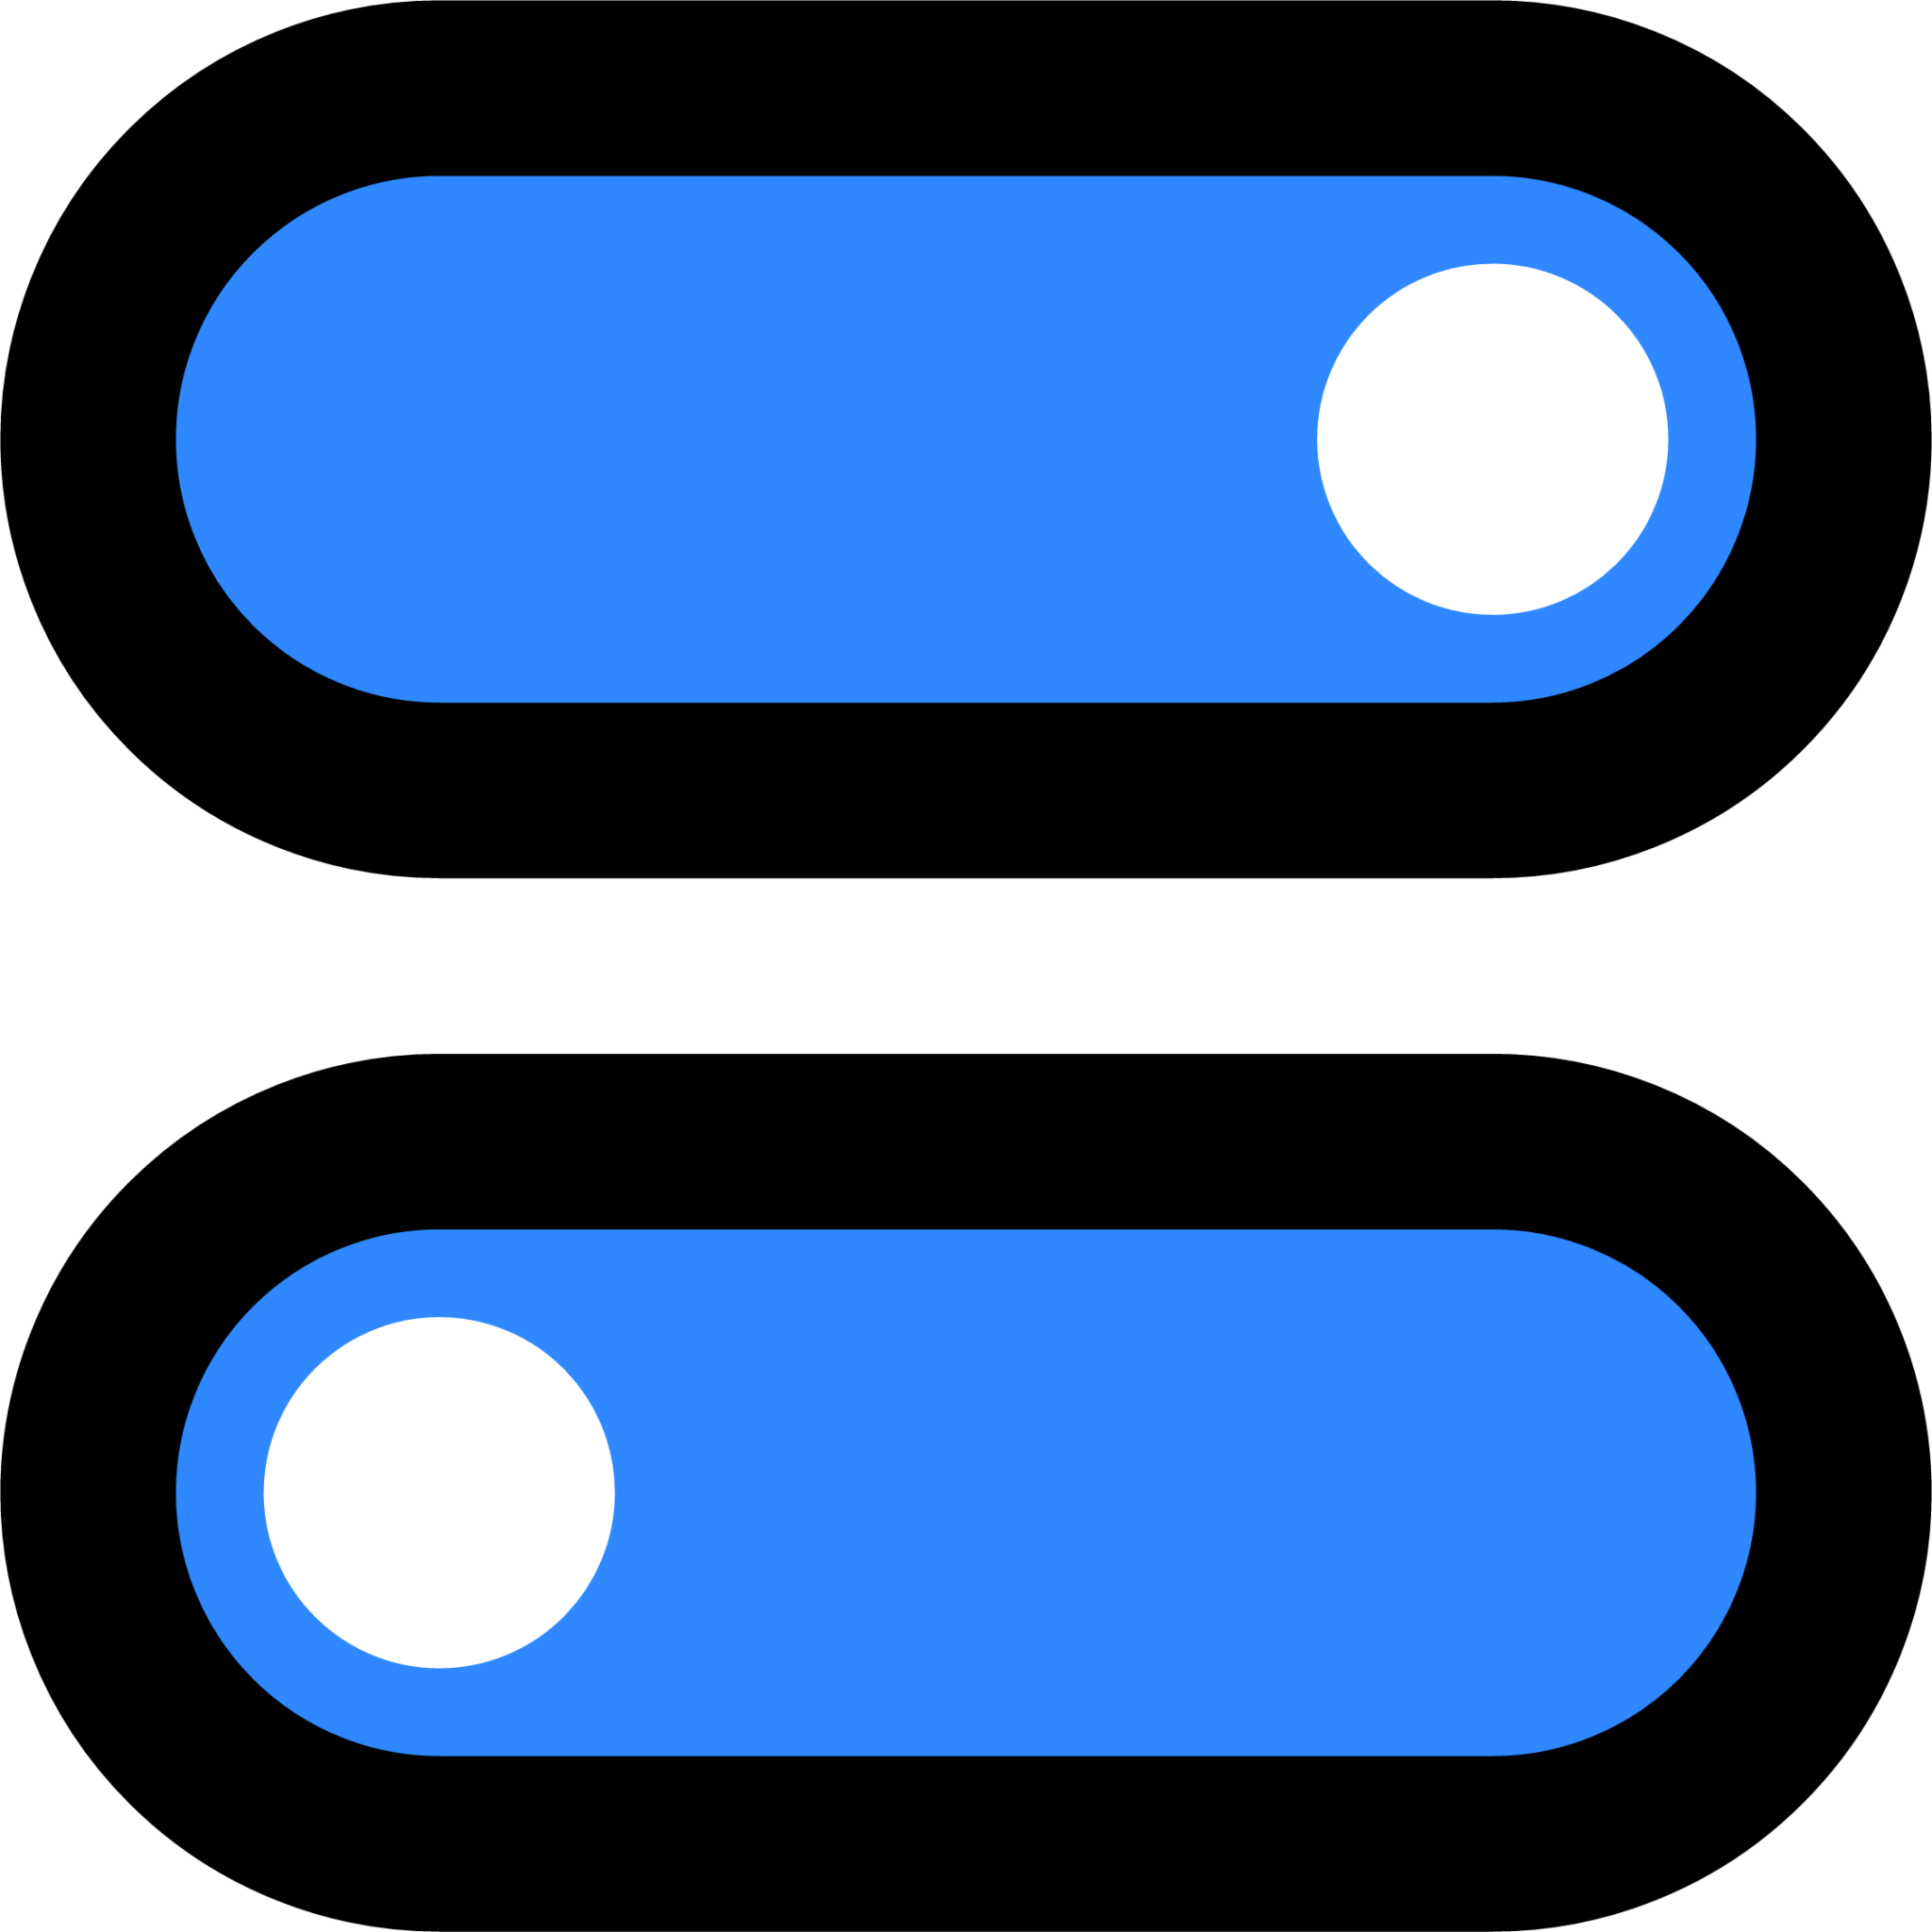 switch button icon